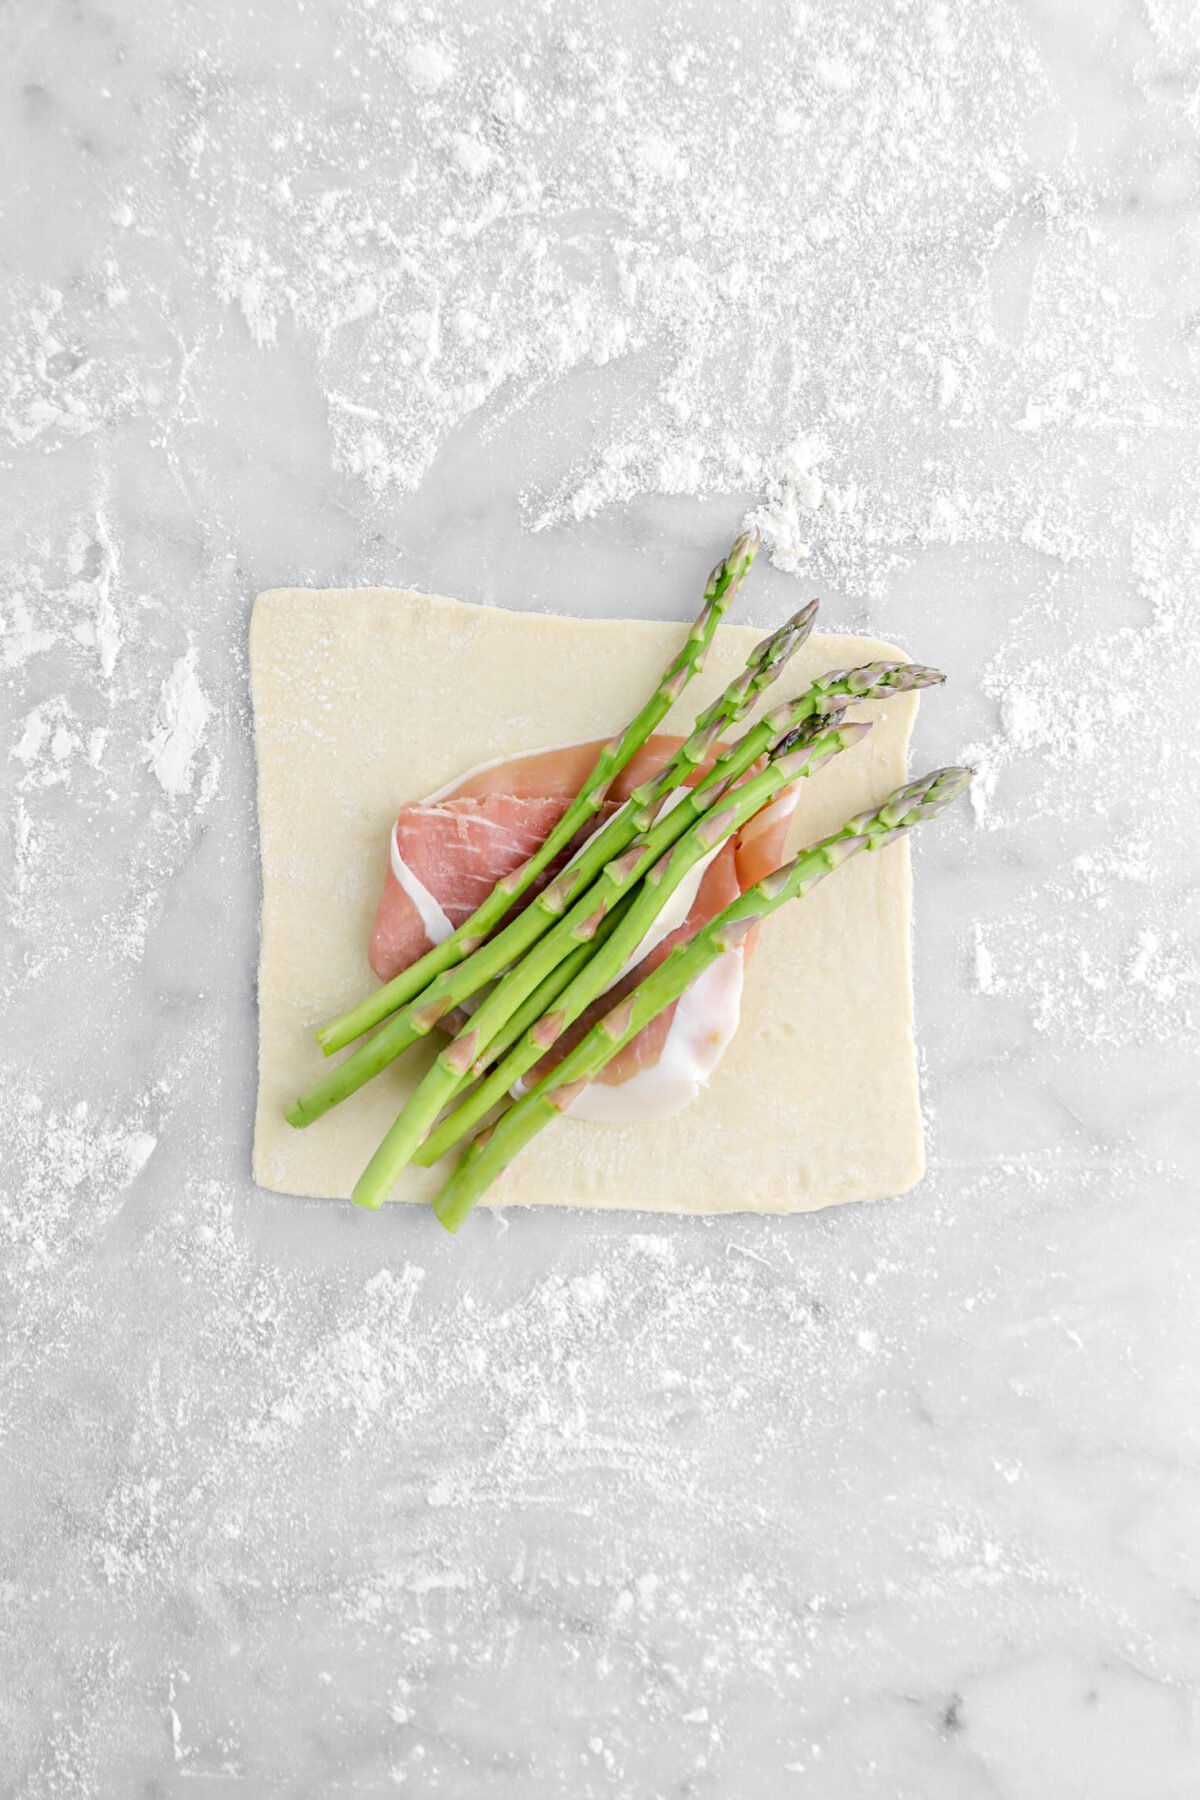 six asparagus added on top of brie .